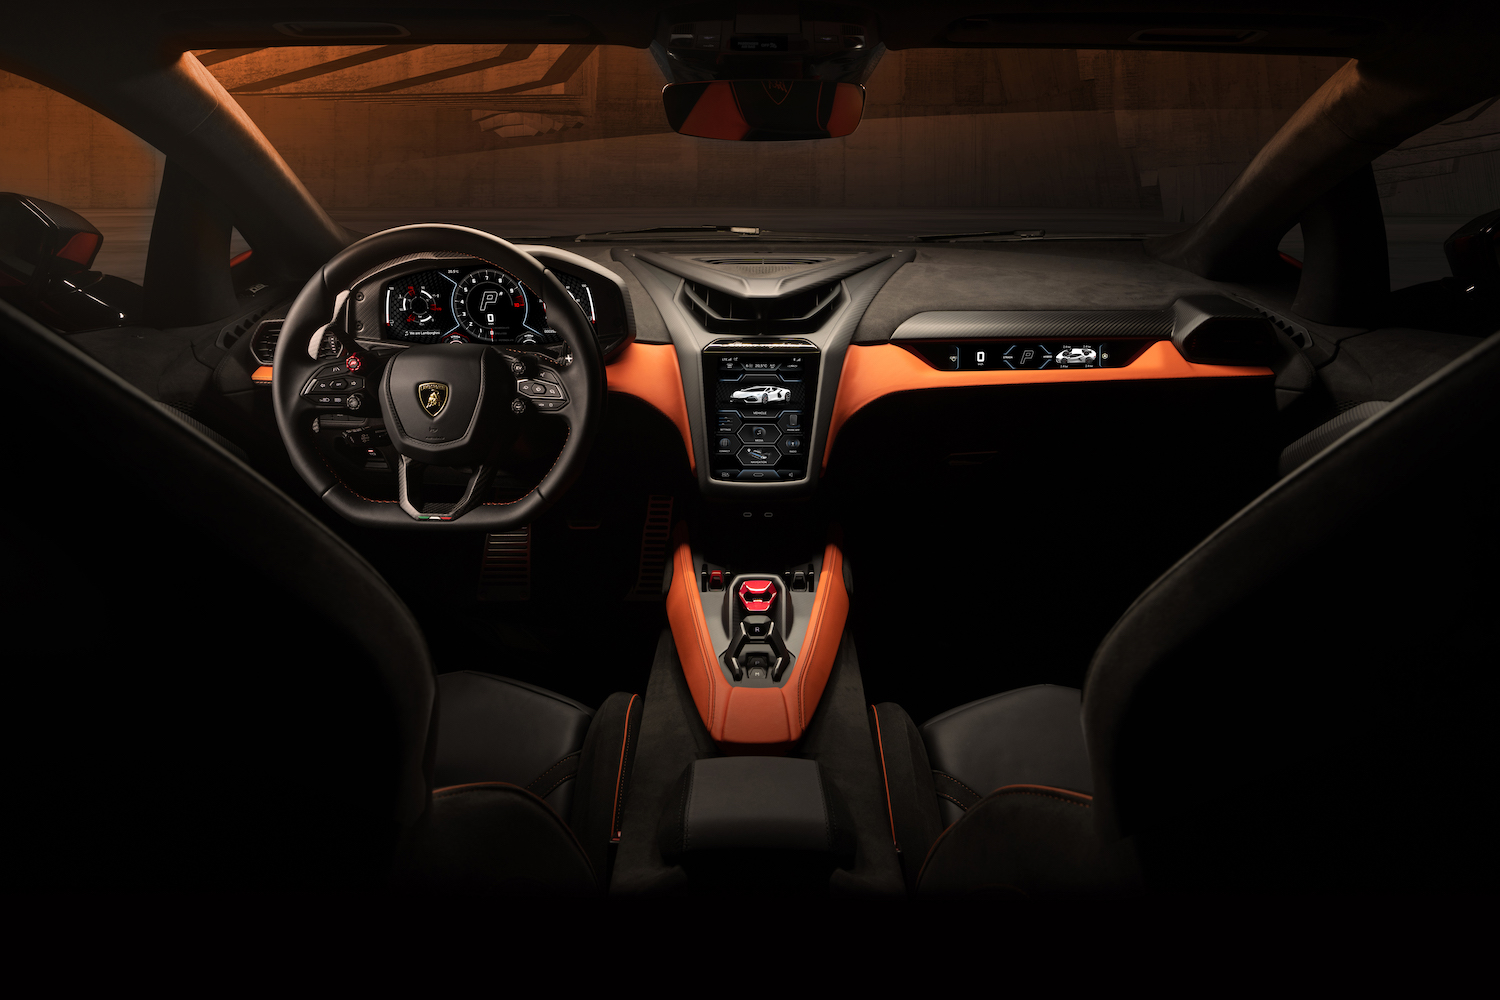 2024 Lamborghini Revuelto interior from behind front seats with mountains in the back.